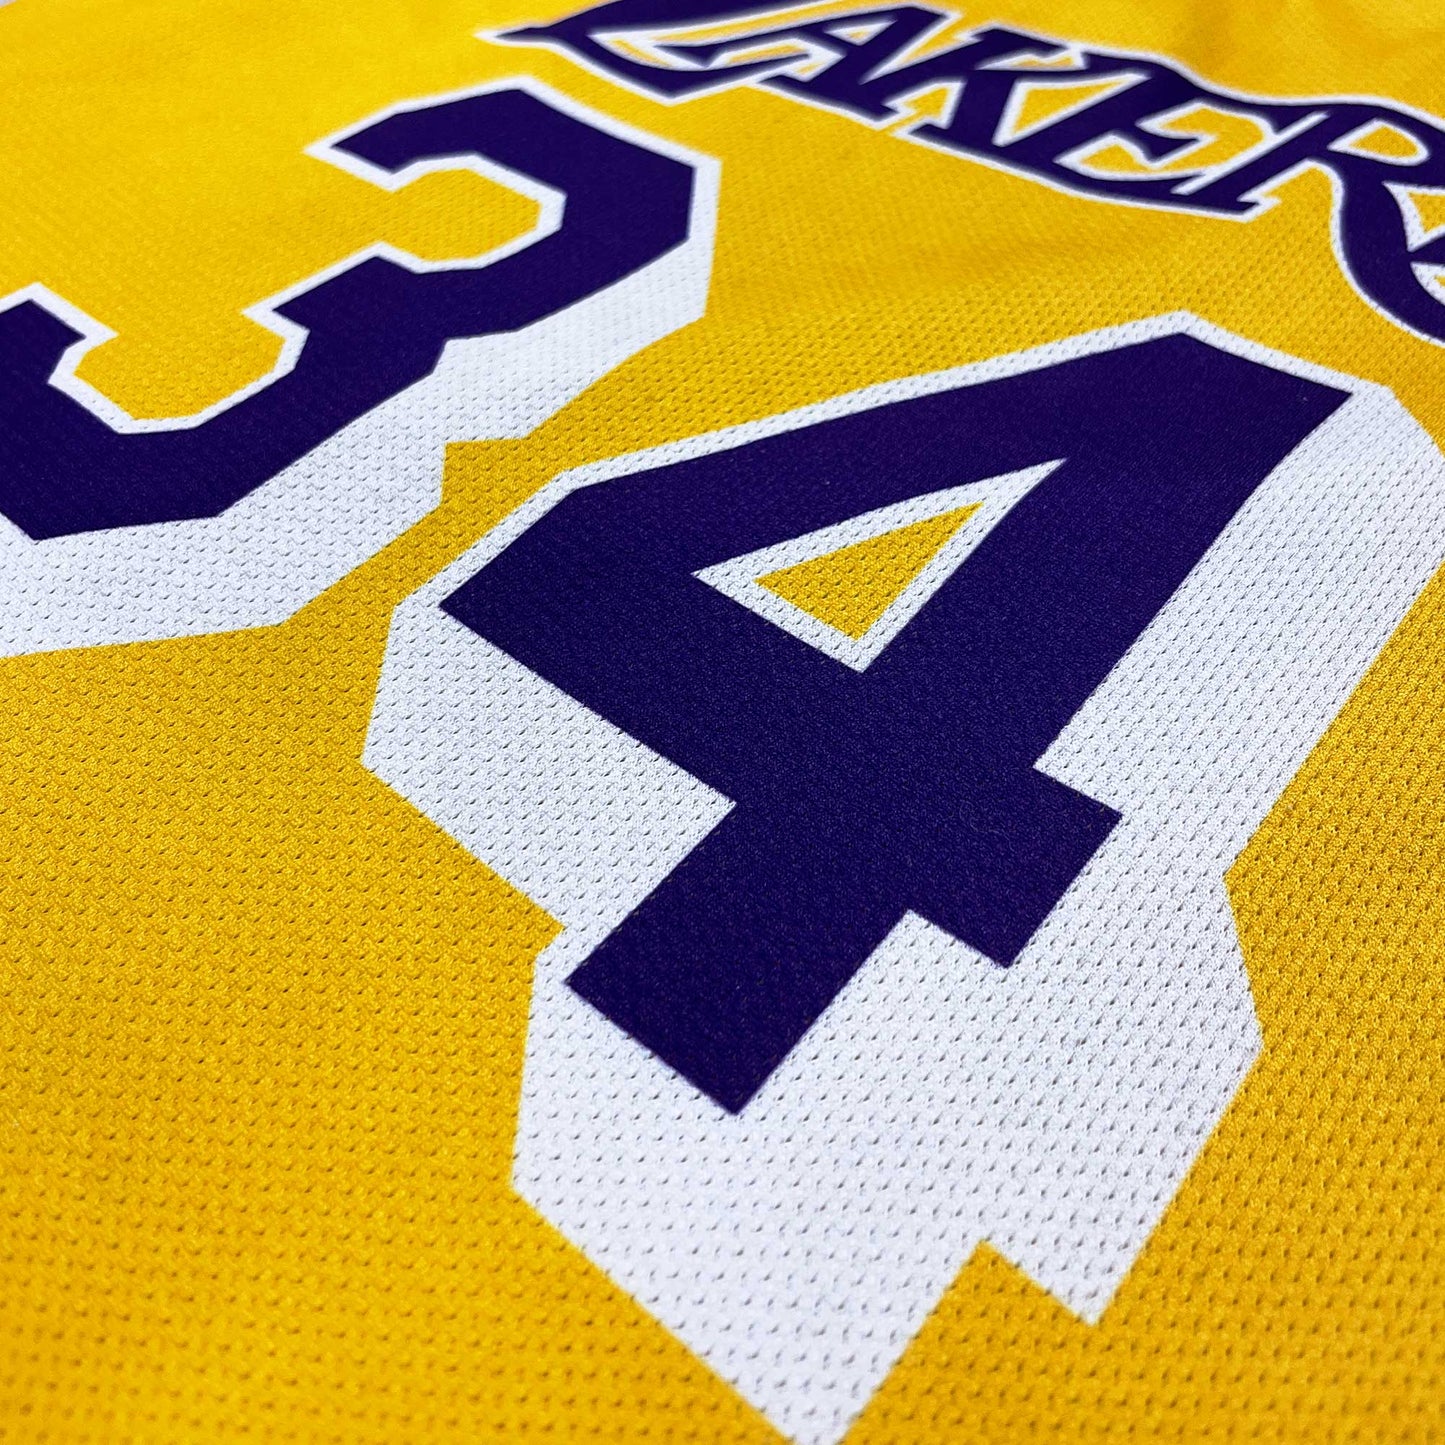 Los Angeles Lakers - Shaquille O’Neal - Größe M - Champion - NBA Trikot